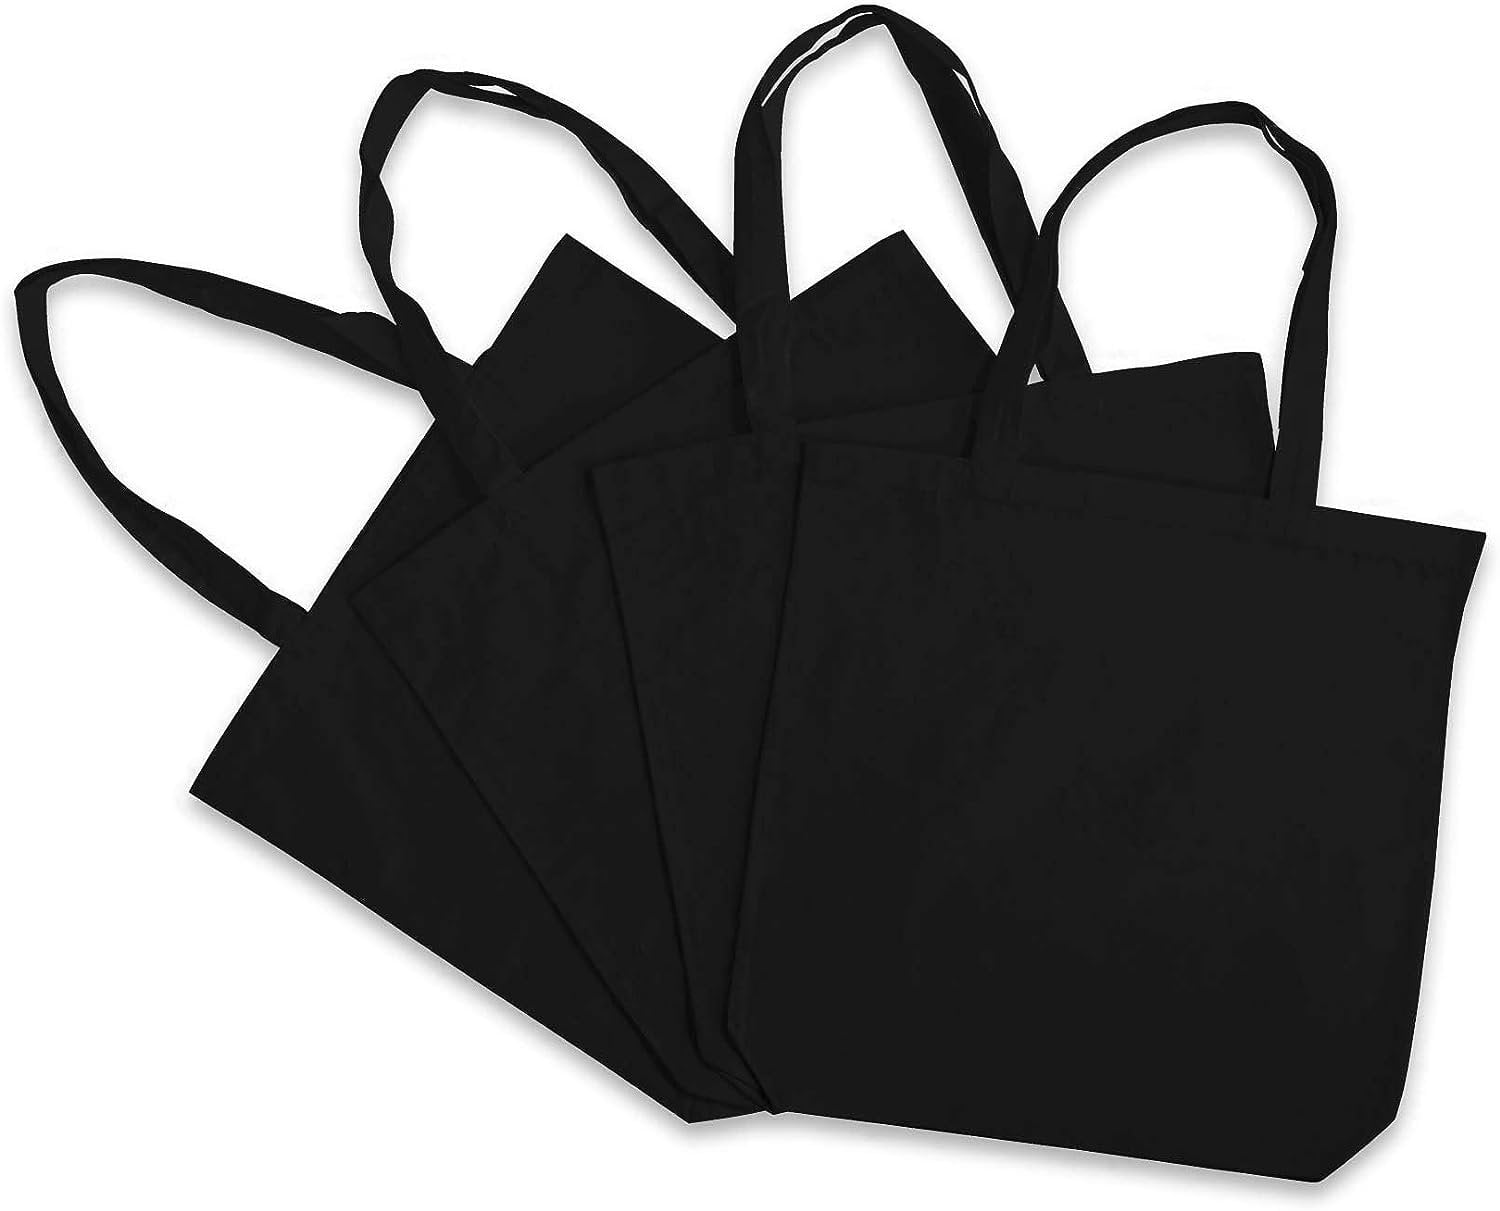 Organic Cotton Canvas Tote Bags Bulk - 12 Pack - Certified Organic Cotton Bags, Eco Friendly Reusable Canvas Totes for Crafts, Decorating, Heat